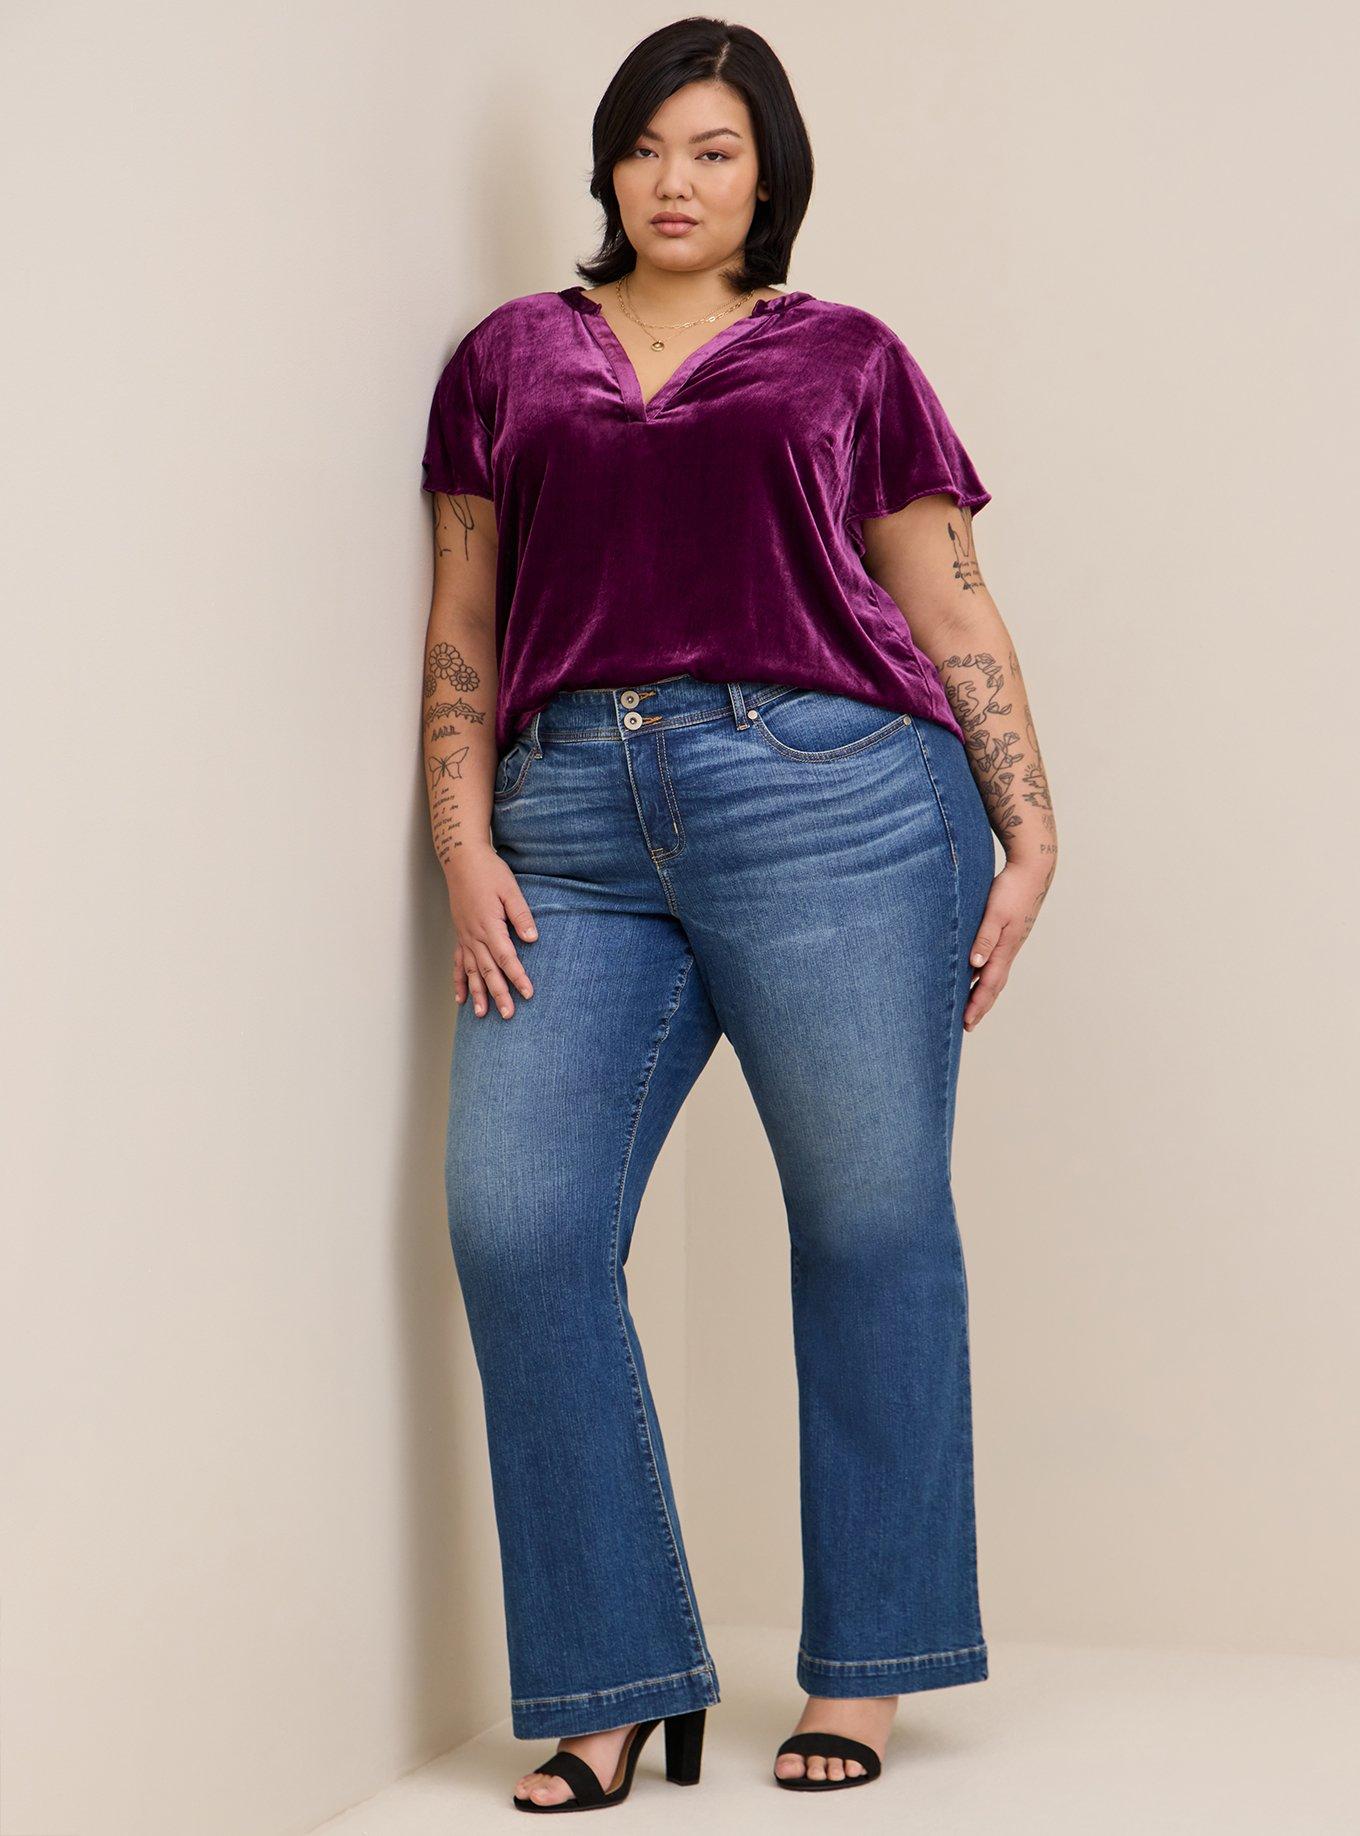 ESPRIT - Mid-rise retro flared jeans at our online shop